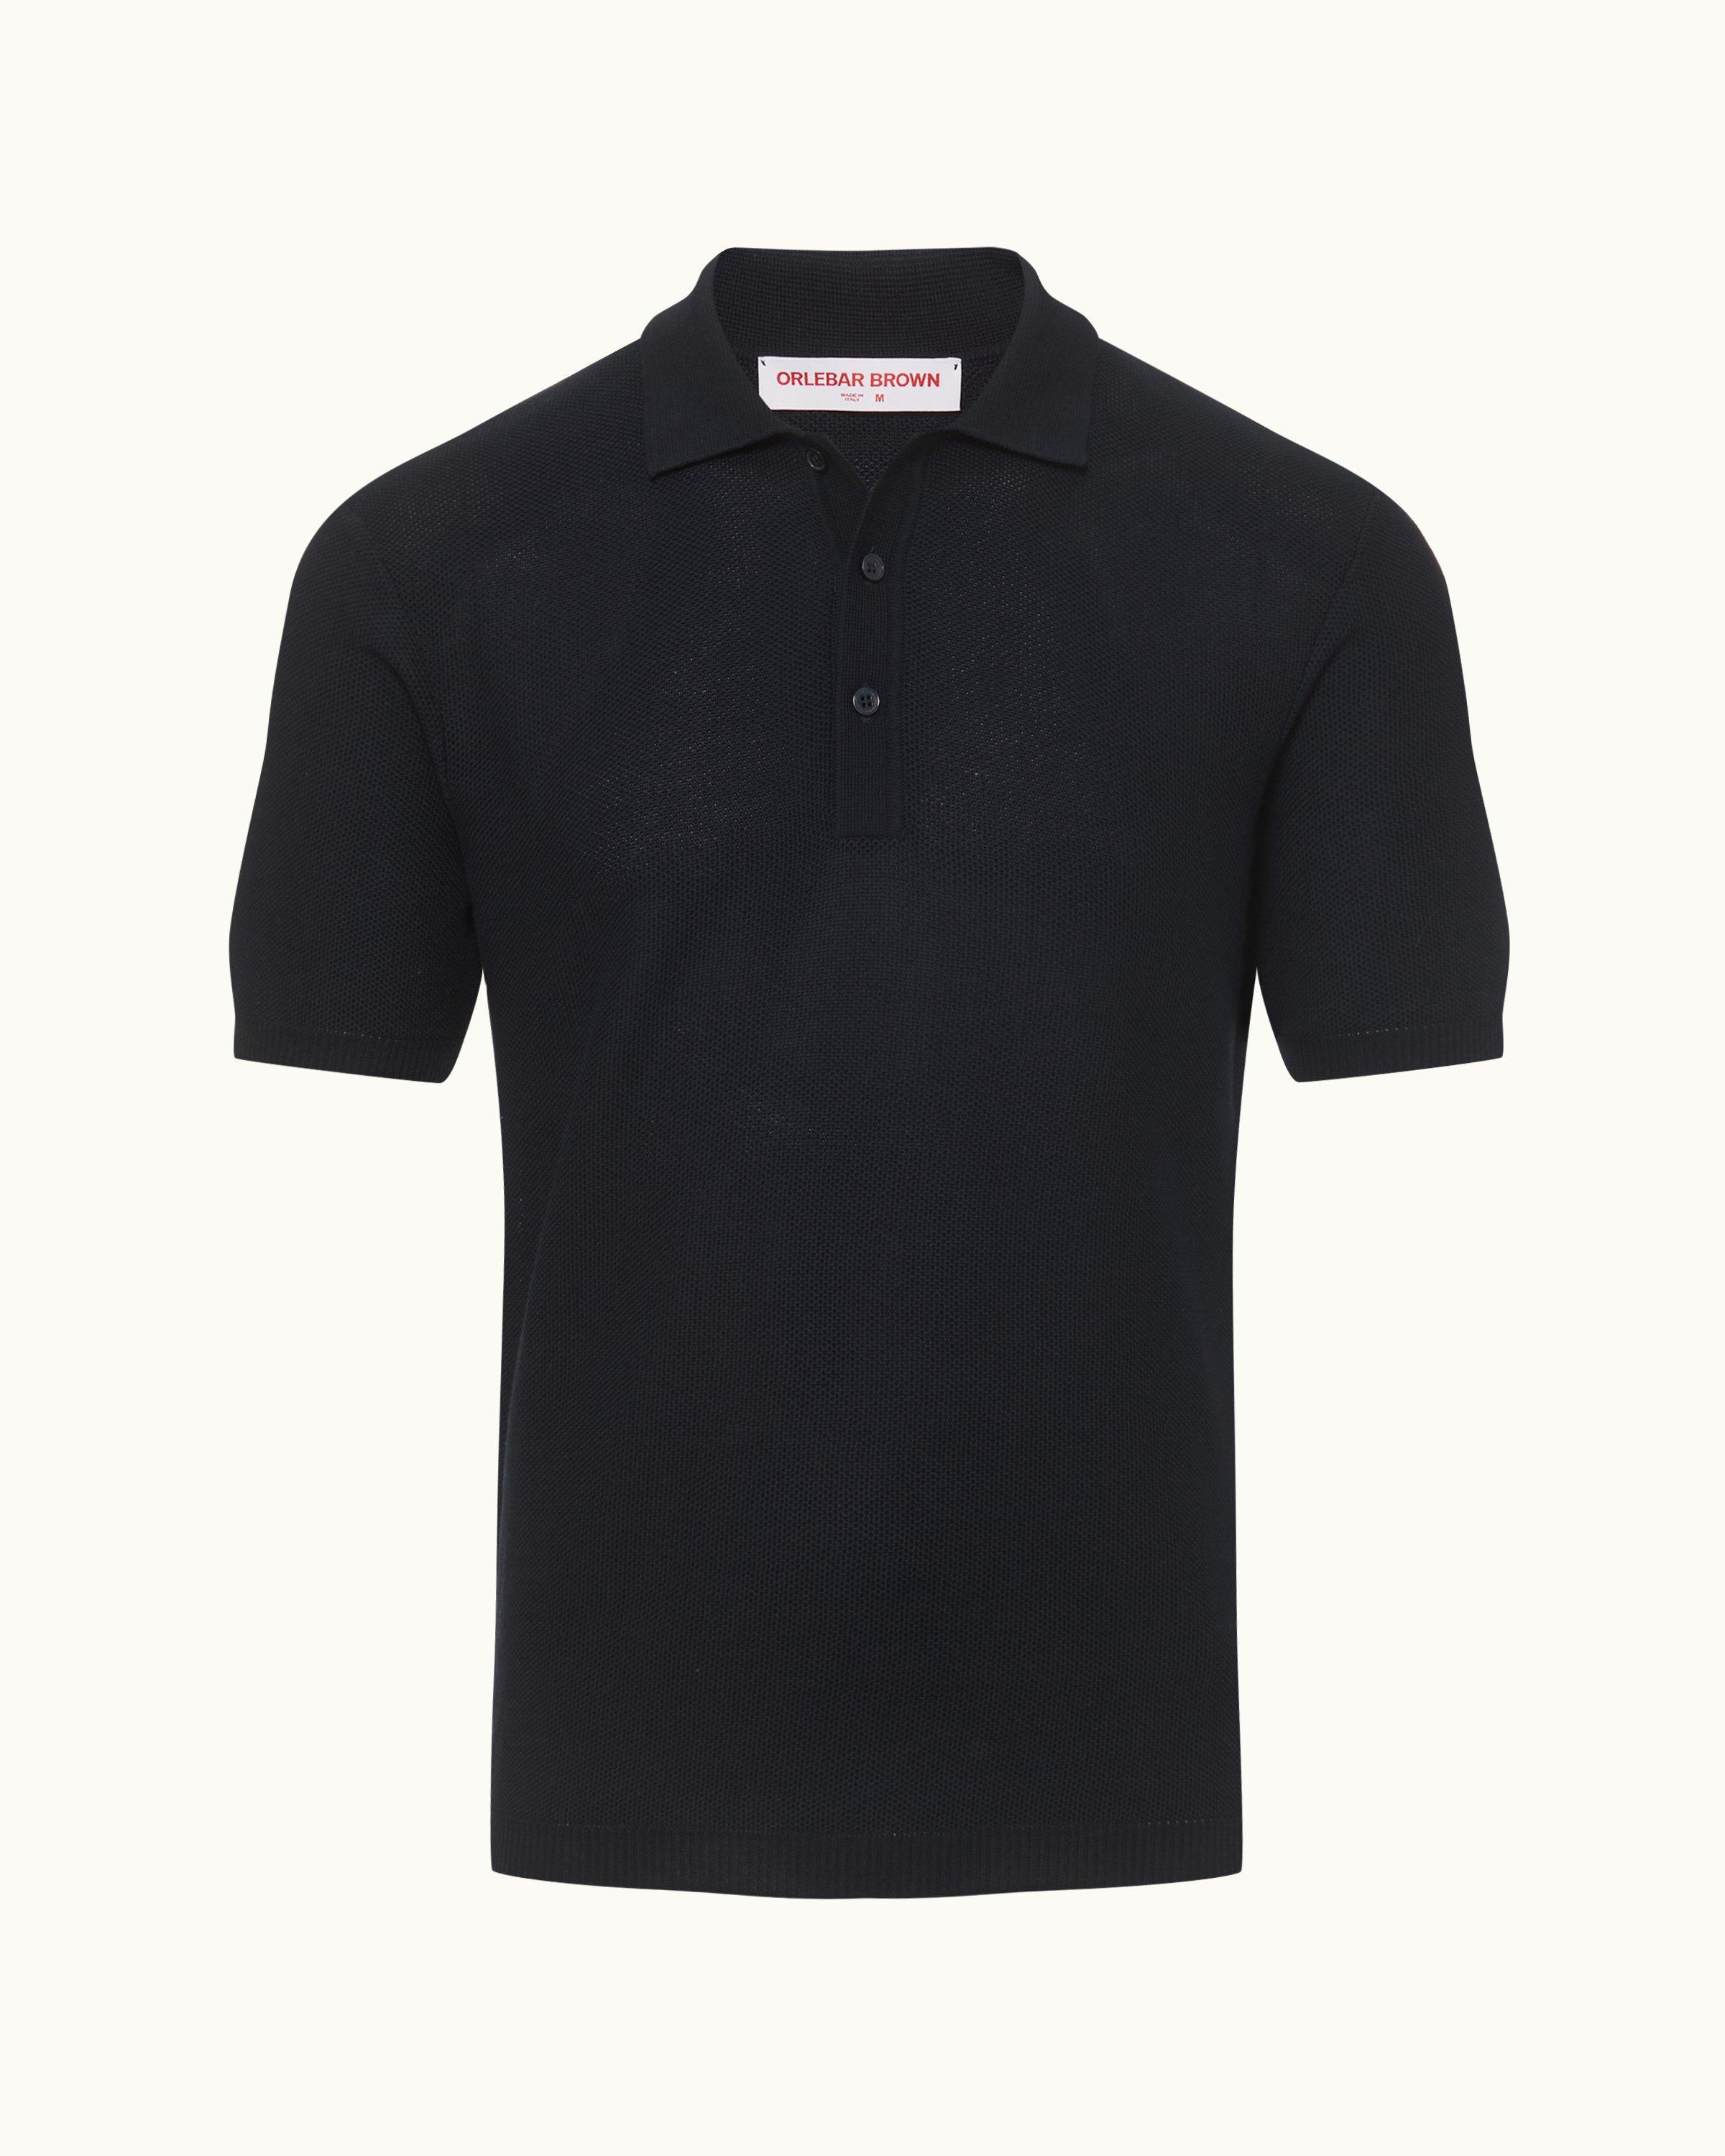 Mens Designer Polo Shirts | Tailored Fit & Stylish Comfort | Orlebar Brown